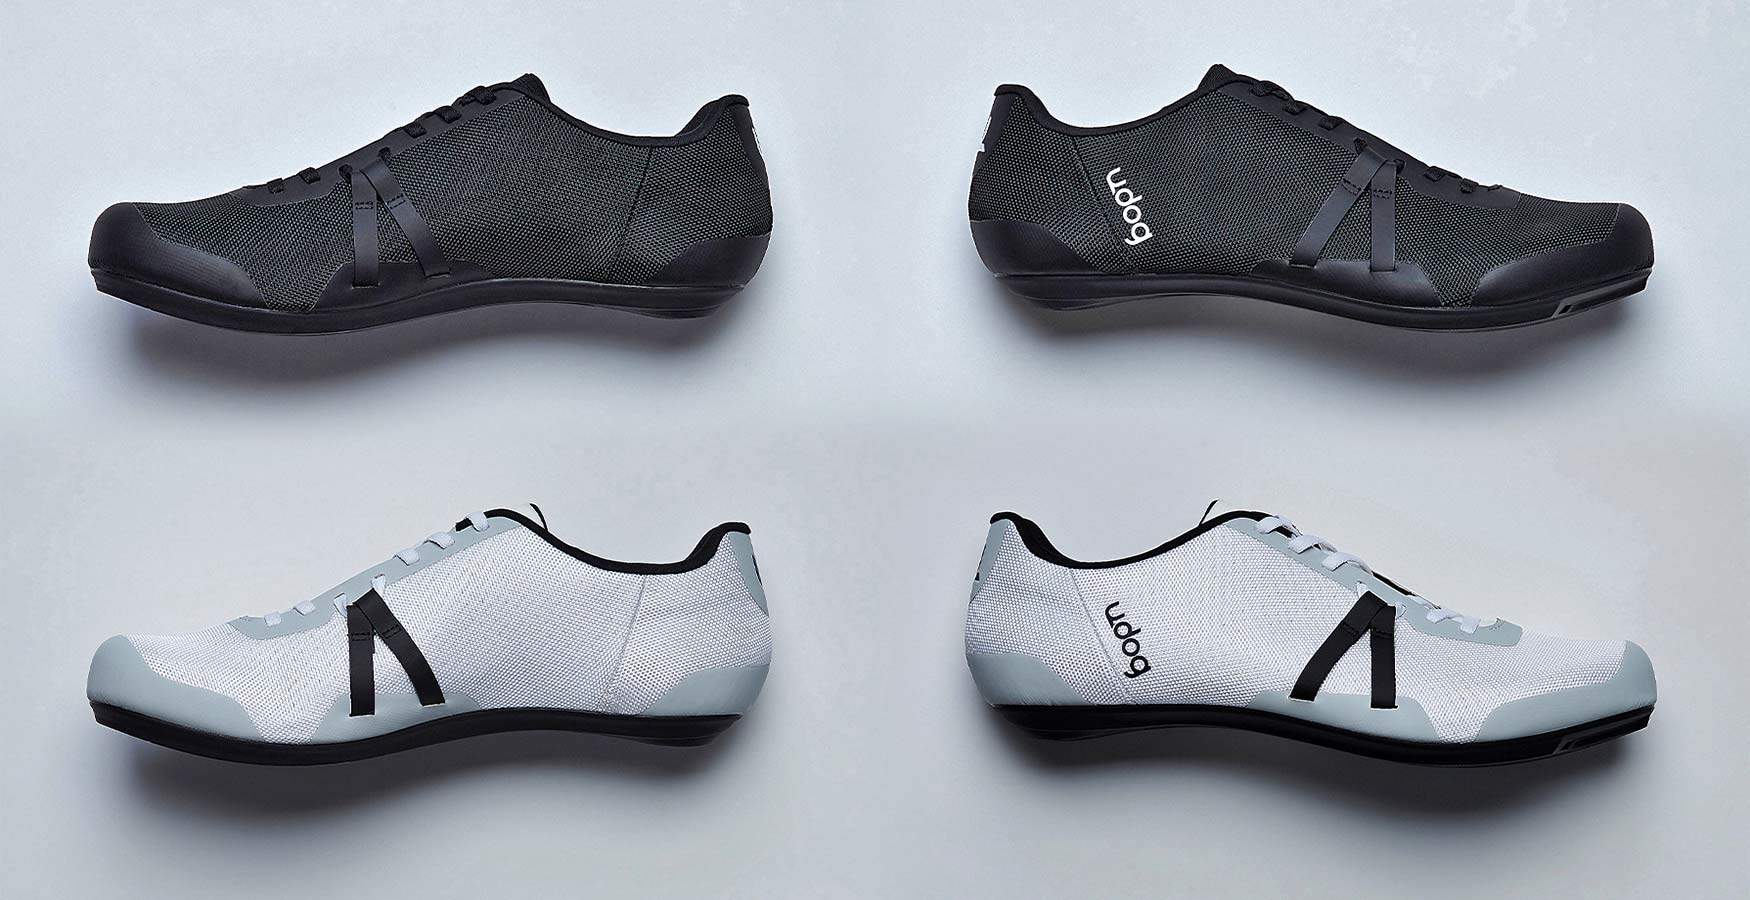 Udog Tensione road shoes, startup lightweight lace-up road cycling shoes, blacl or white